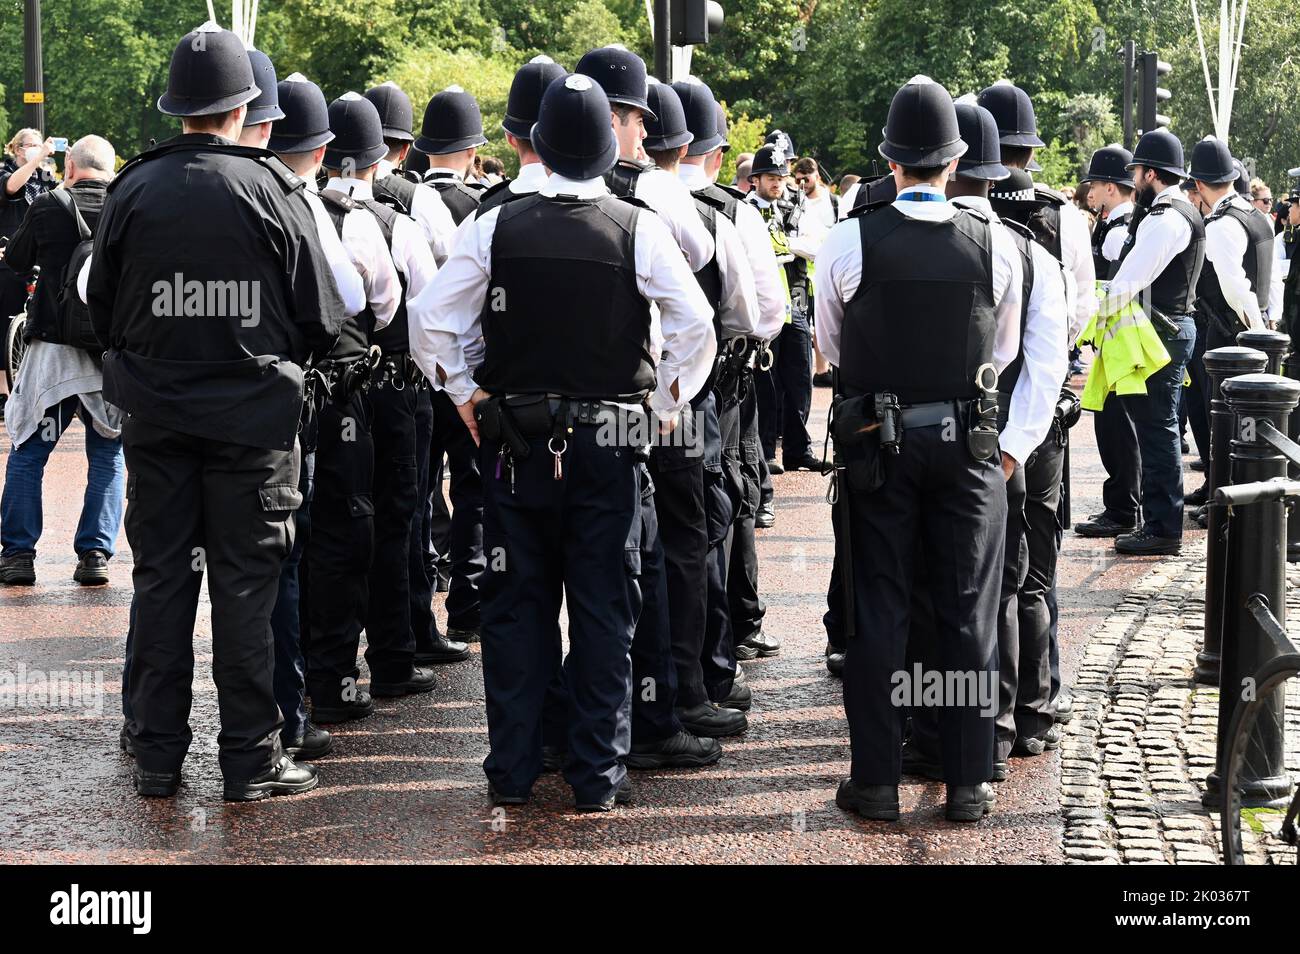 London, UK. Police officers gathered on the Mall prior to the arrival of King Charles III at Buckingham Palace, following the death of Queen Elizabeth II on 08.09.2022. Stock Photo